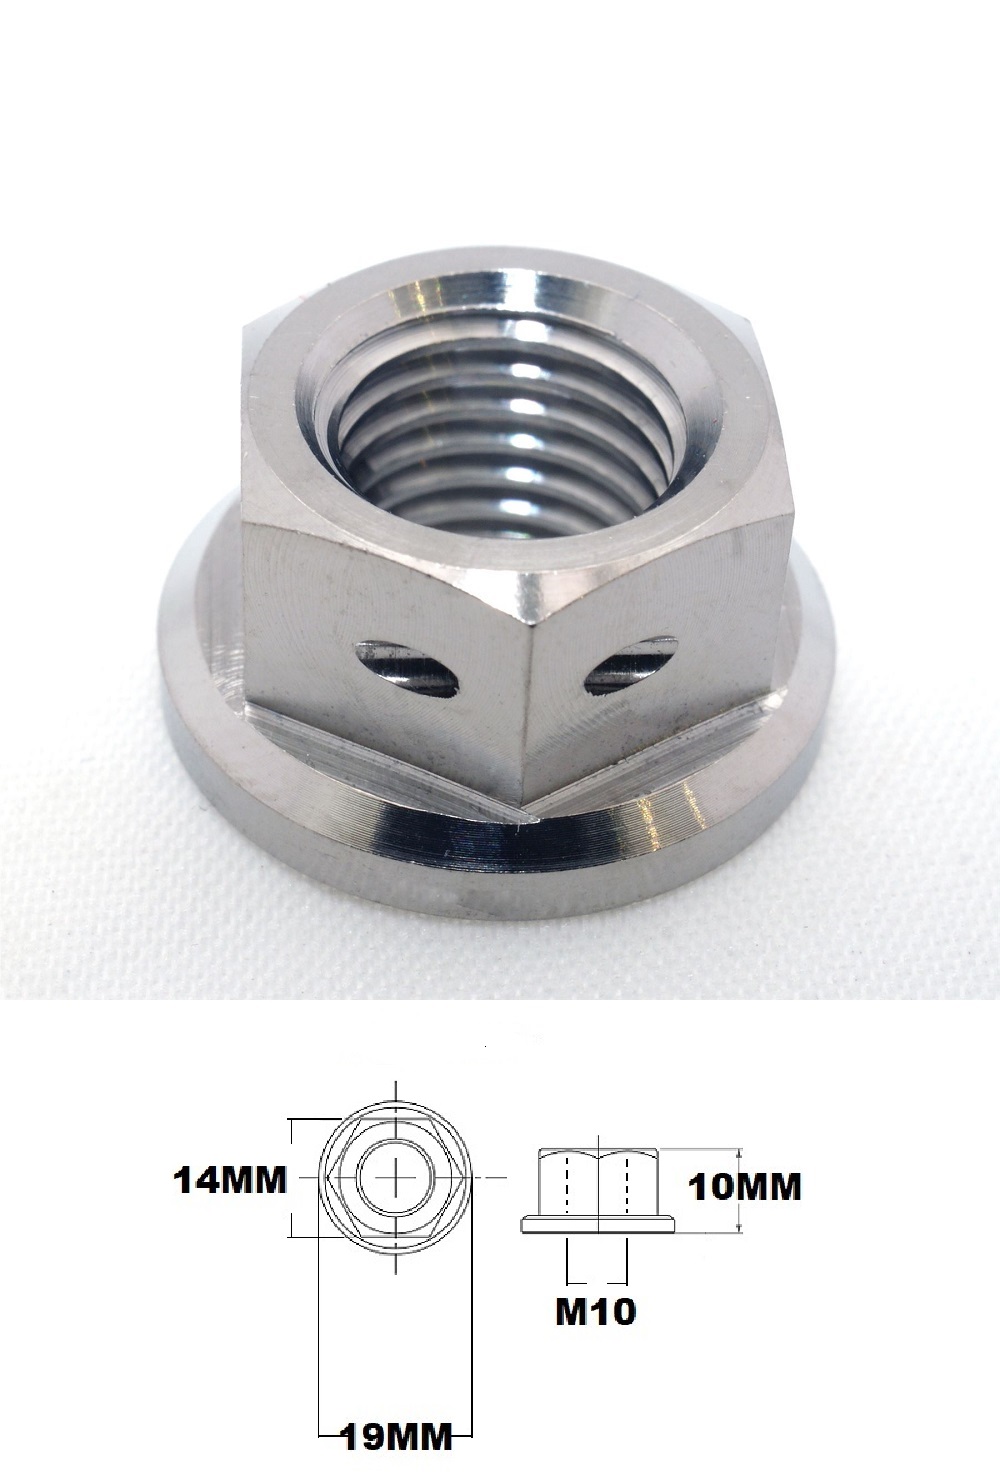 M10X1.5 TITANIUM FLANGE 14MM HEX NUT GR5 RACE DRILLED FOR WIRE